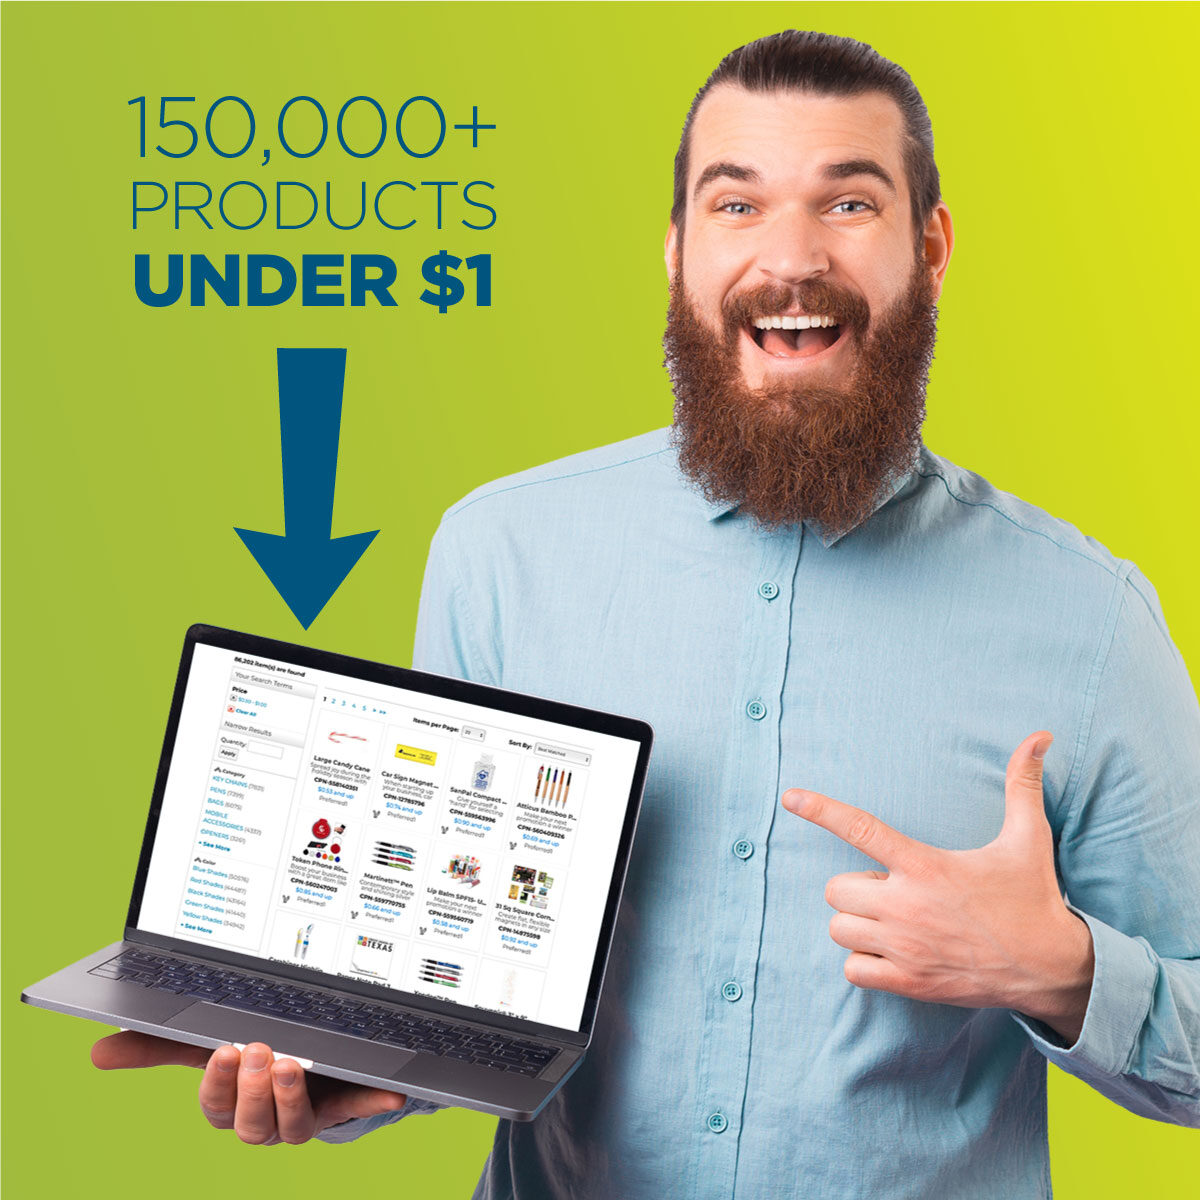 Man with laptop point at screen - text reads 150,000 products under $1